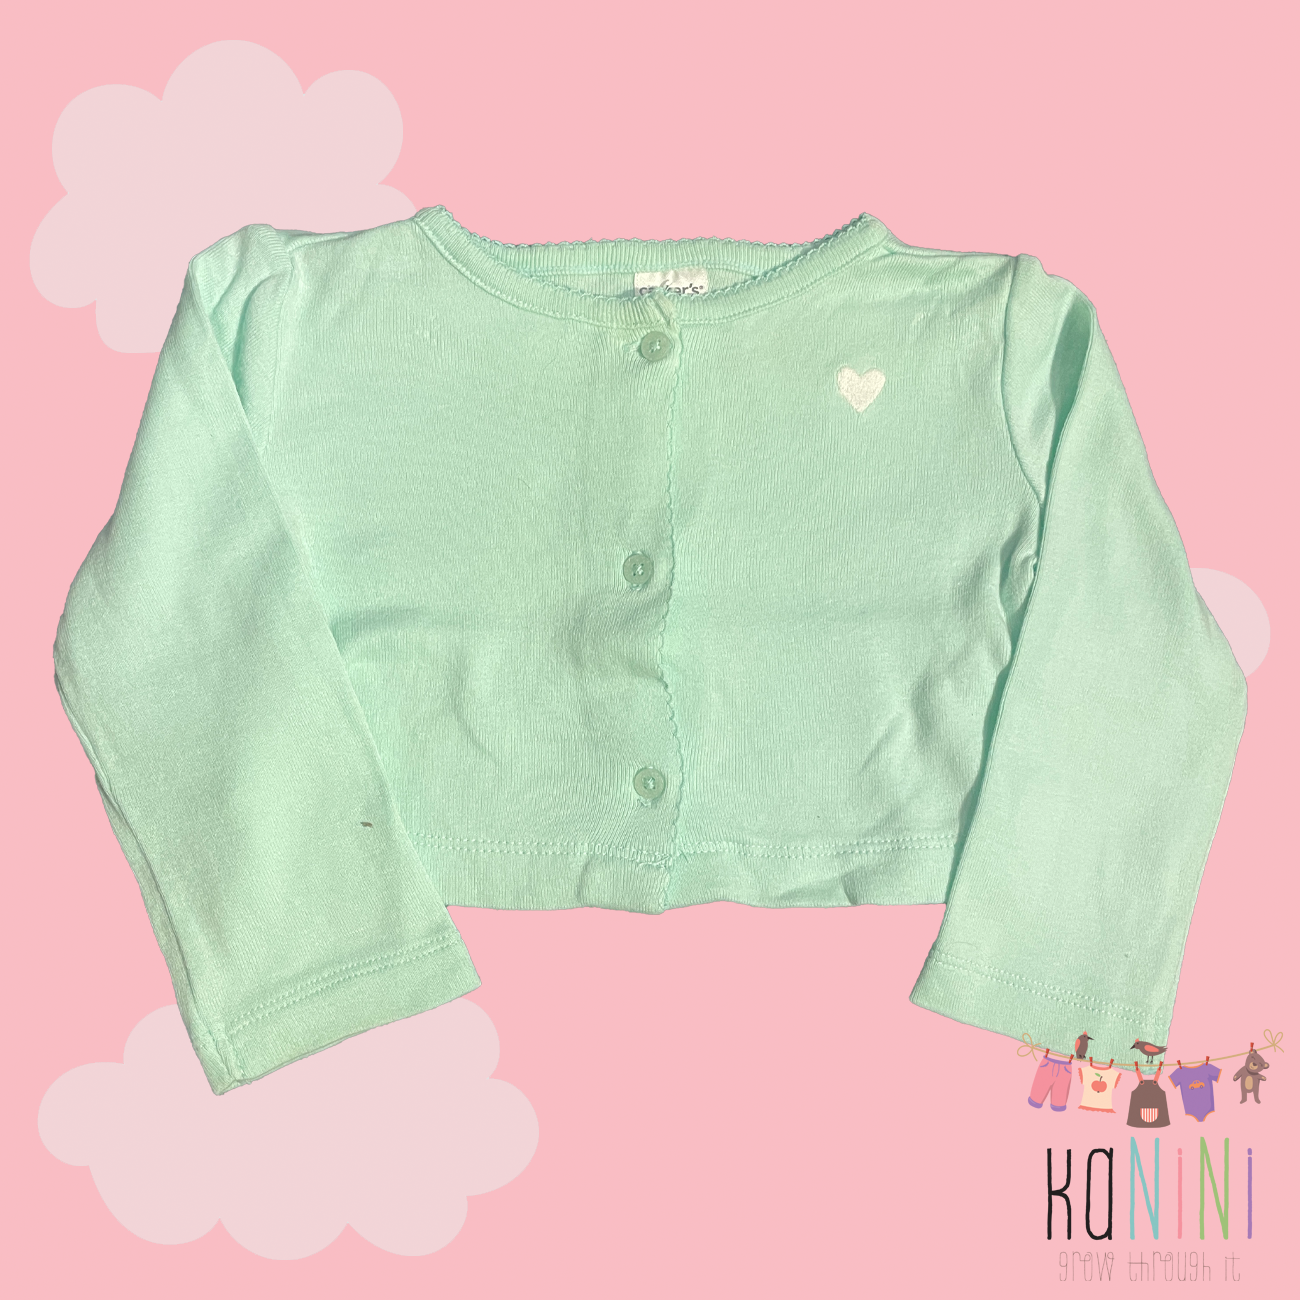 Featured image for “Carter's 9 Months Girls Turquoise Cardigan”